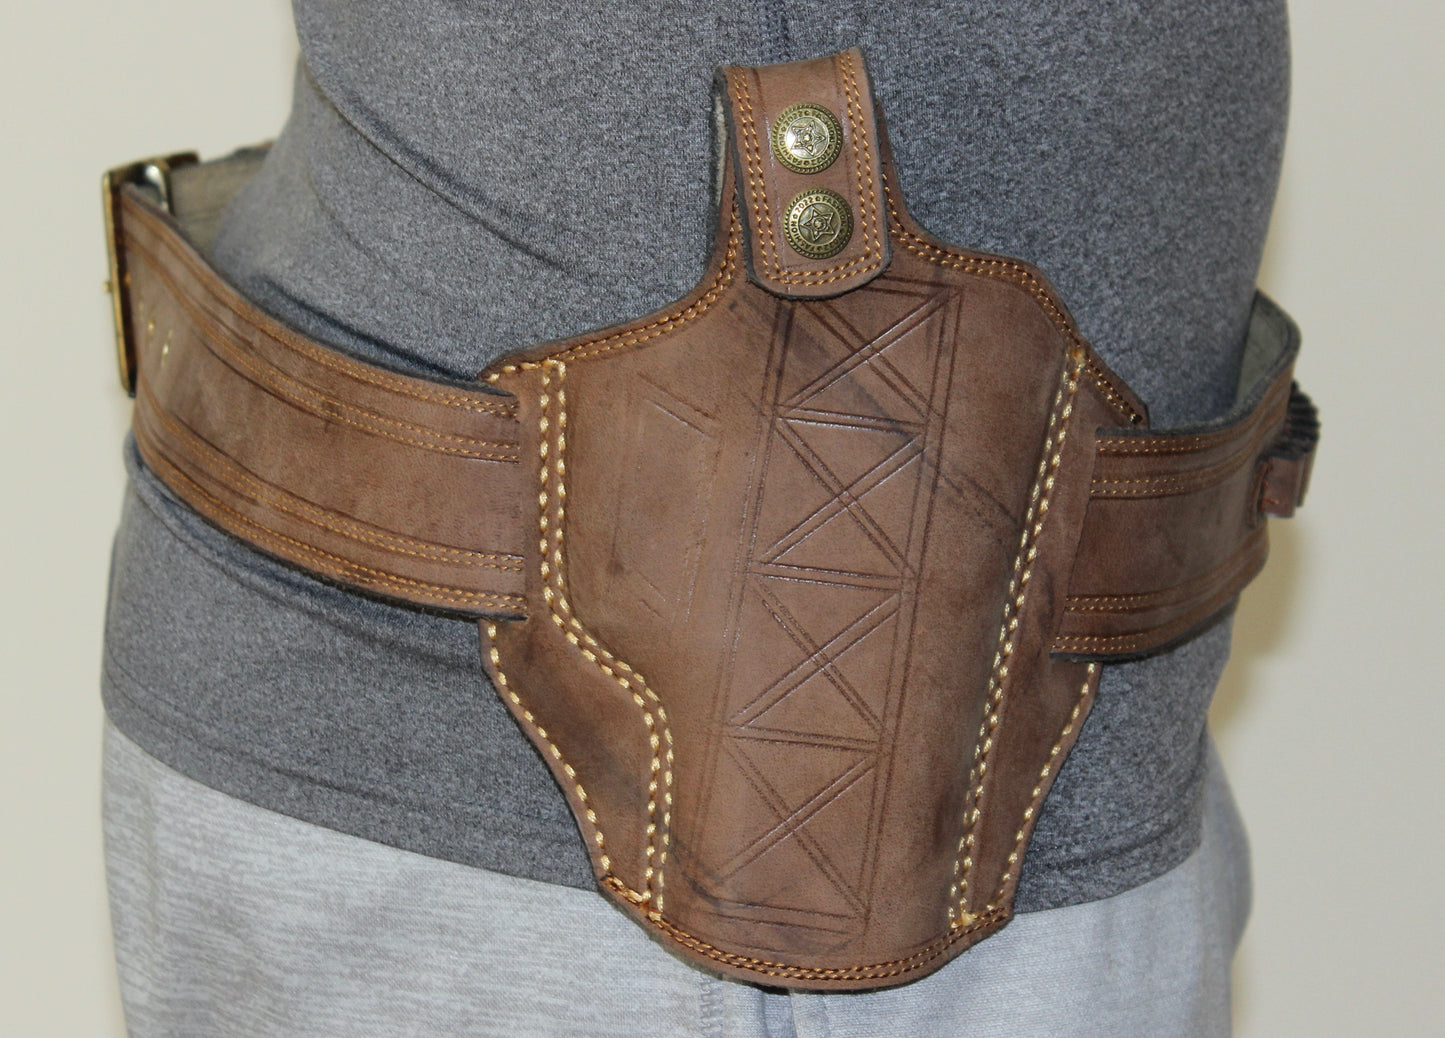 Patterned Leather Holster